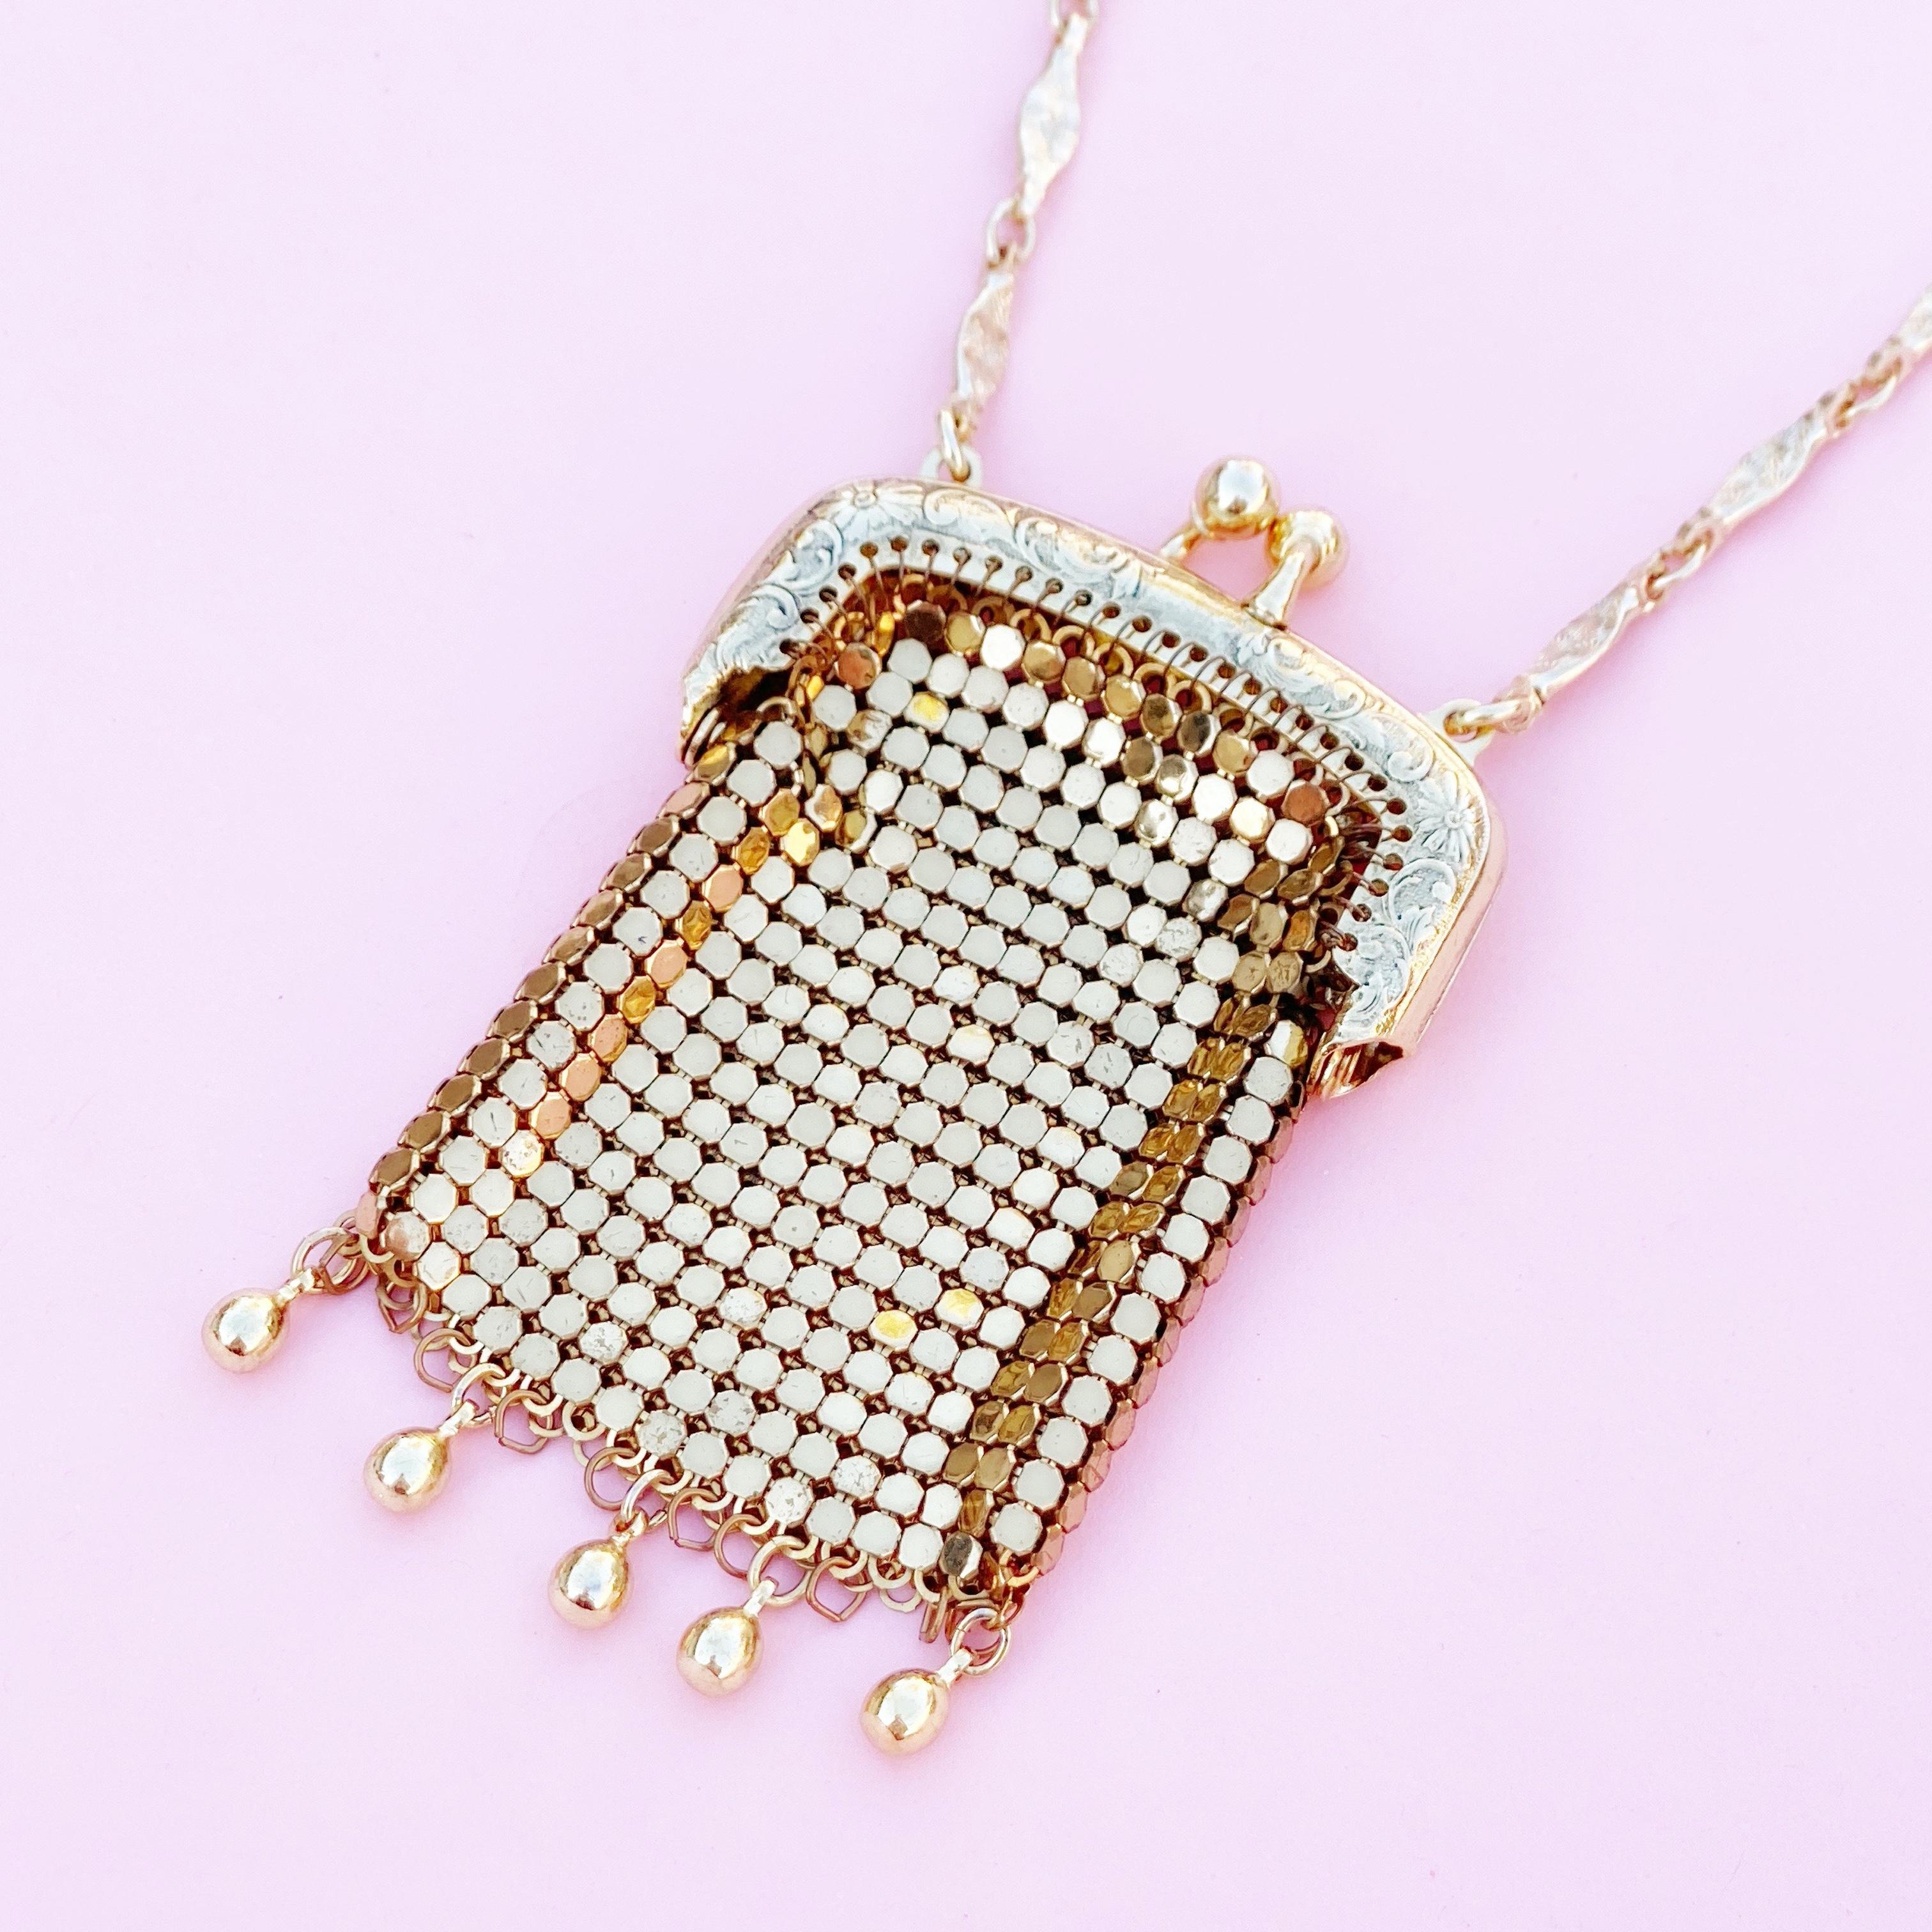 Women's Vintage Gold Mesh Pouch Necklace by Whiting & Davis, 1960s